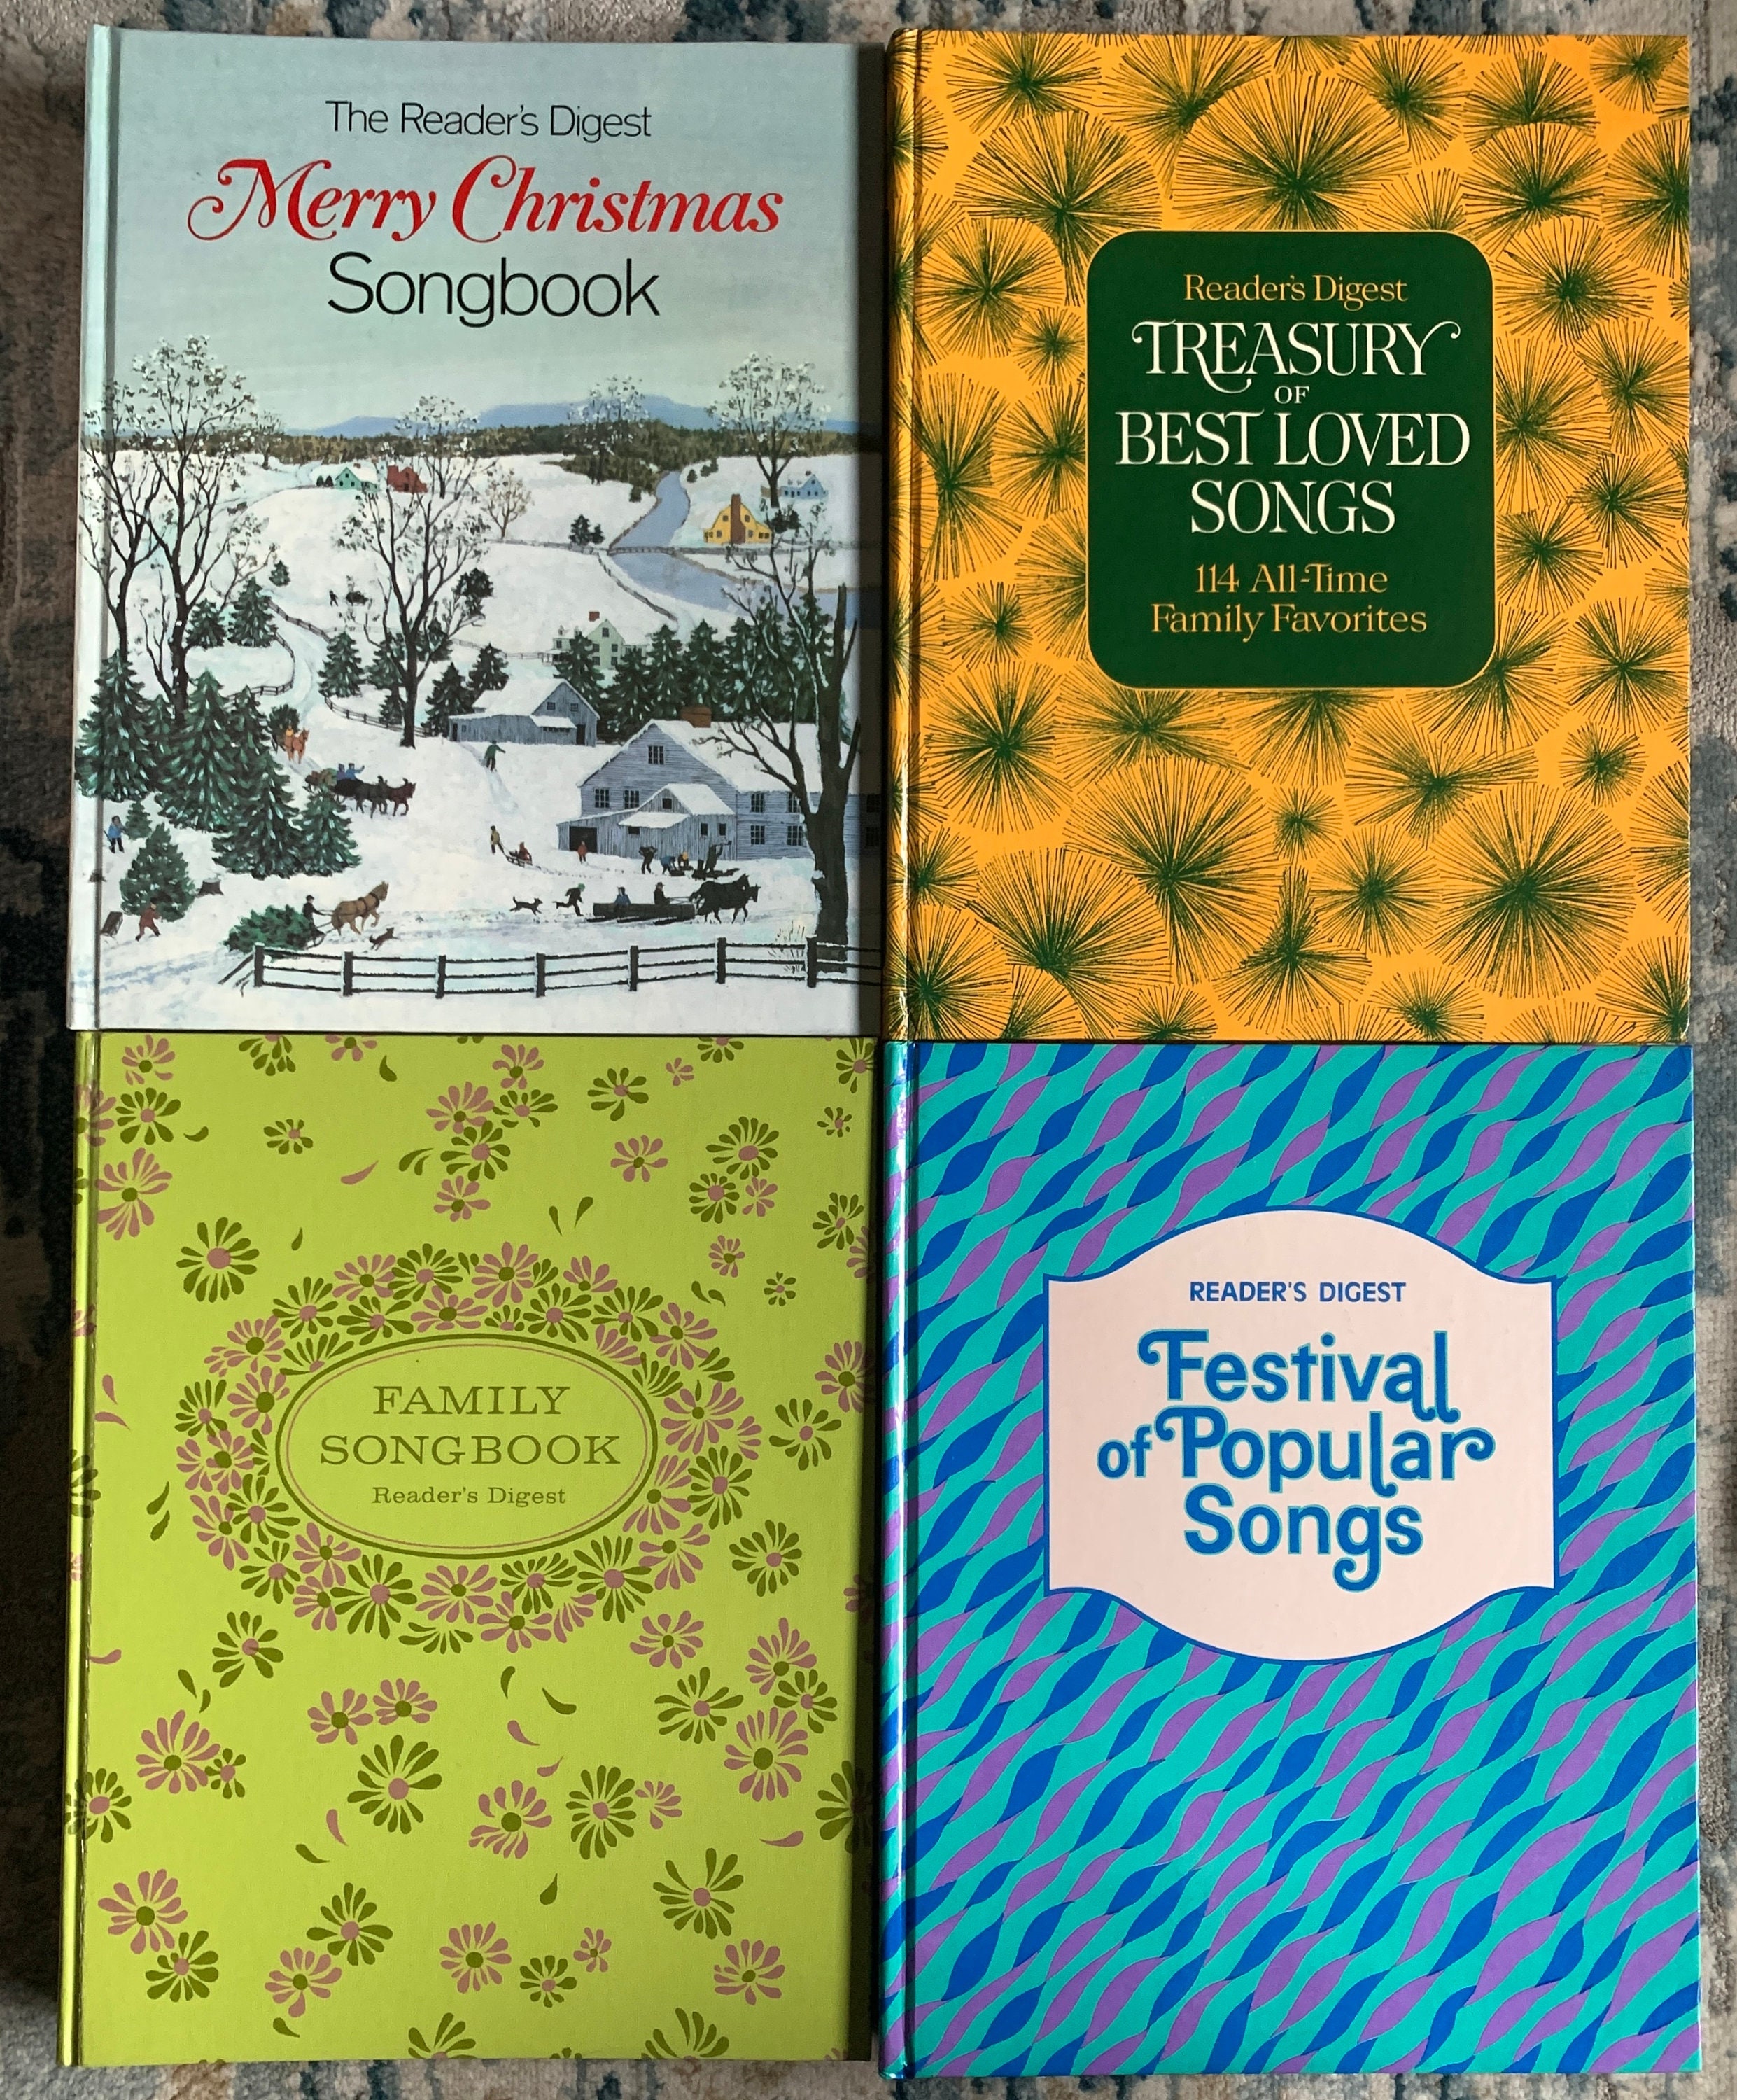 Sold Separately, Reader's Digest Songbooks, Binder of Music